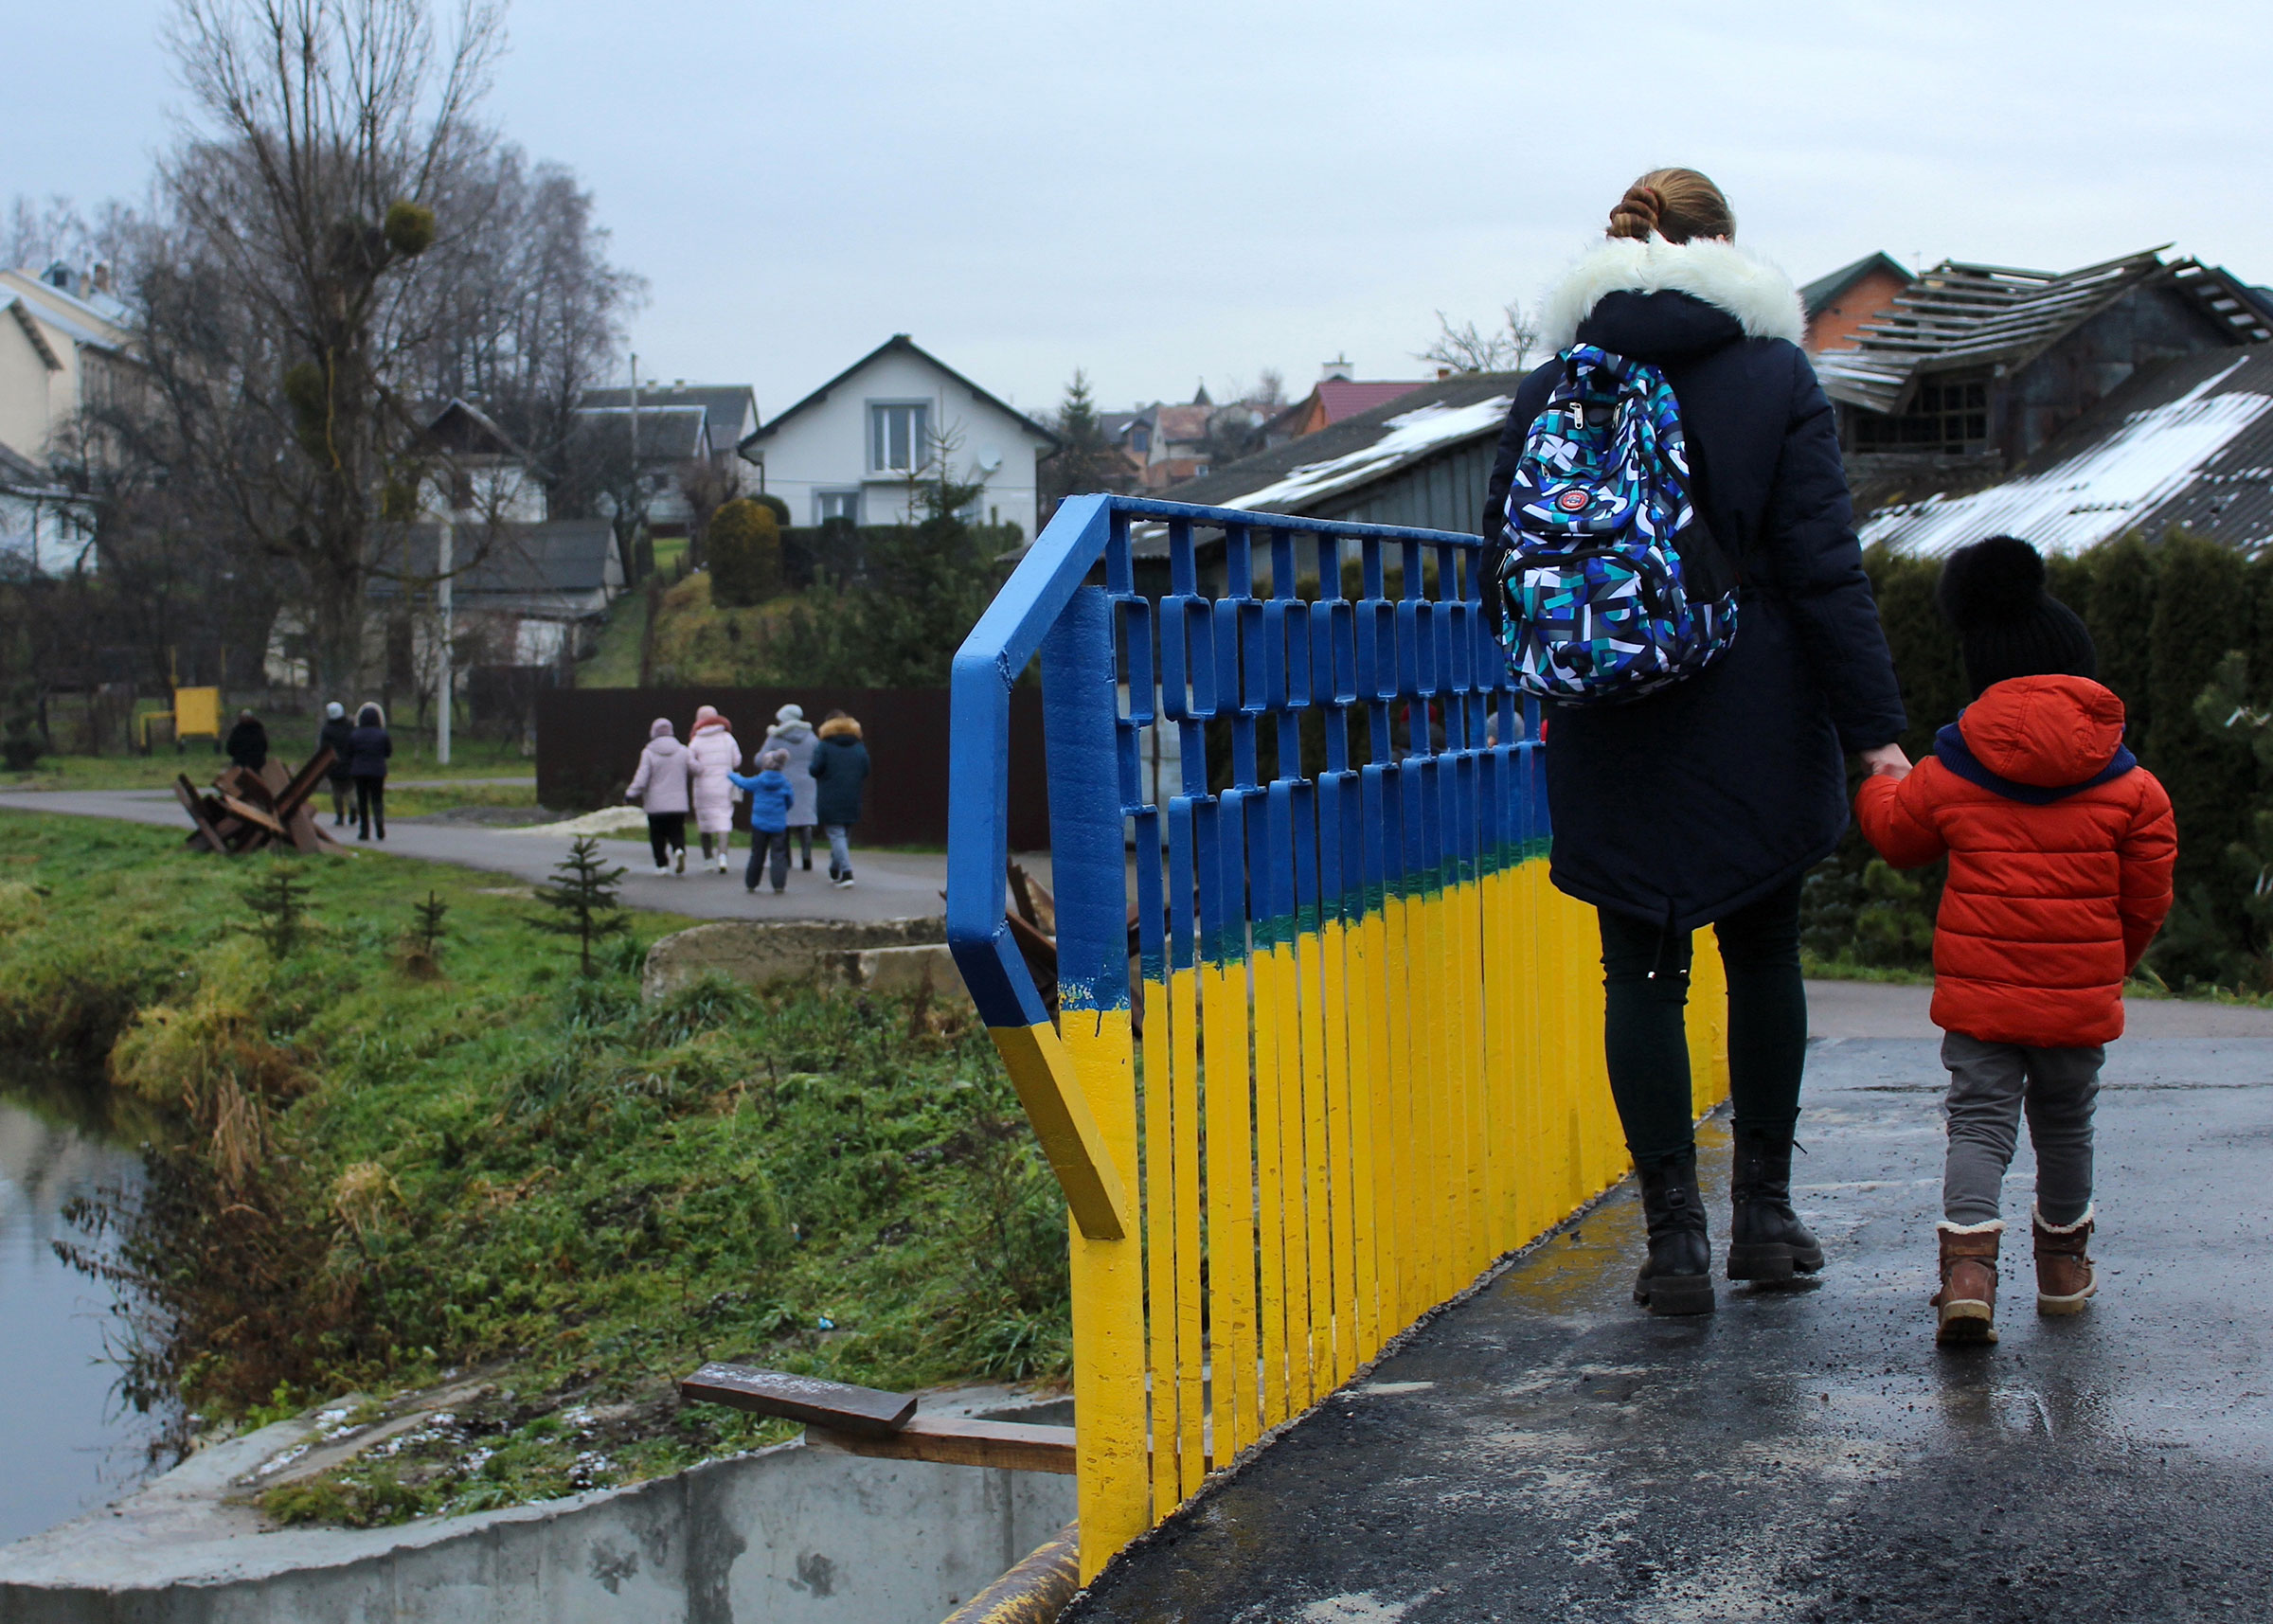 A domestic violence survivor and her child walk across a bridge during an excursion outside of Lviv, organized by the Centre for Women's Perspectives. (Jessie Williams for the Fuller Project)